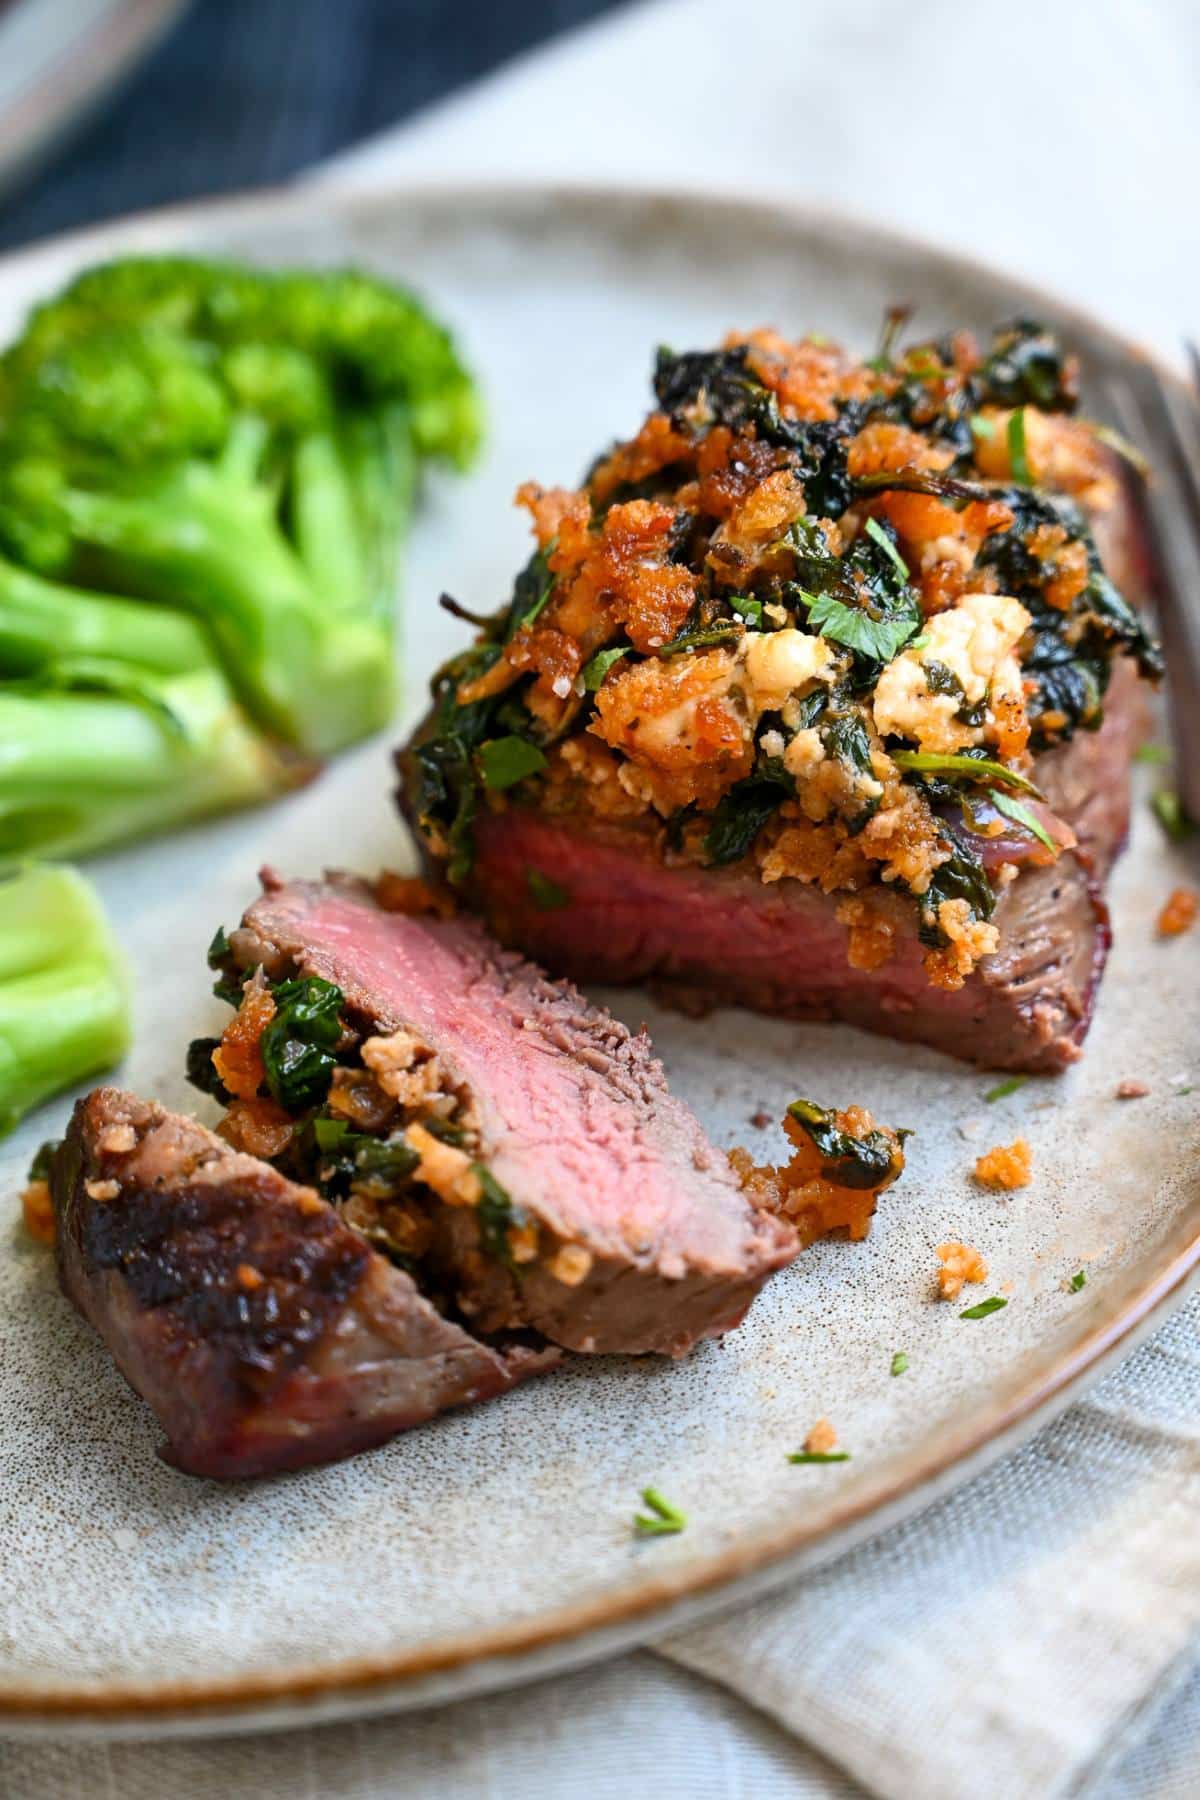 a sliced sirloin steak topped with a Mediterranean inspired topping on a plate with broccoli